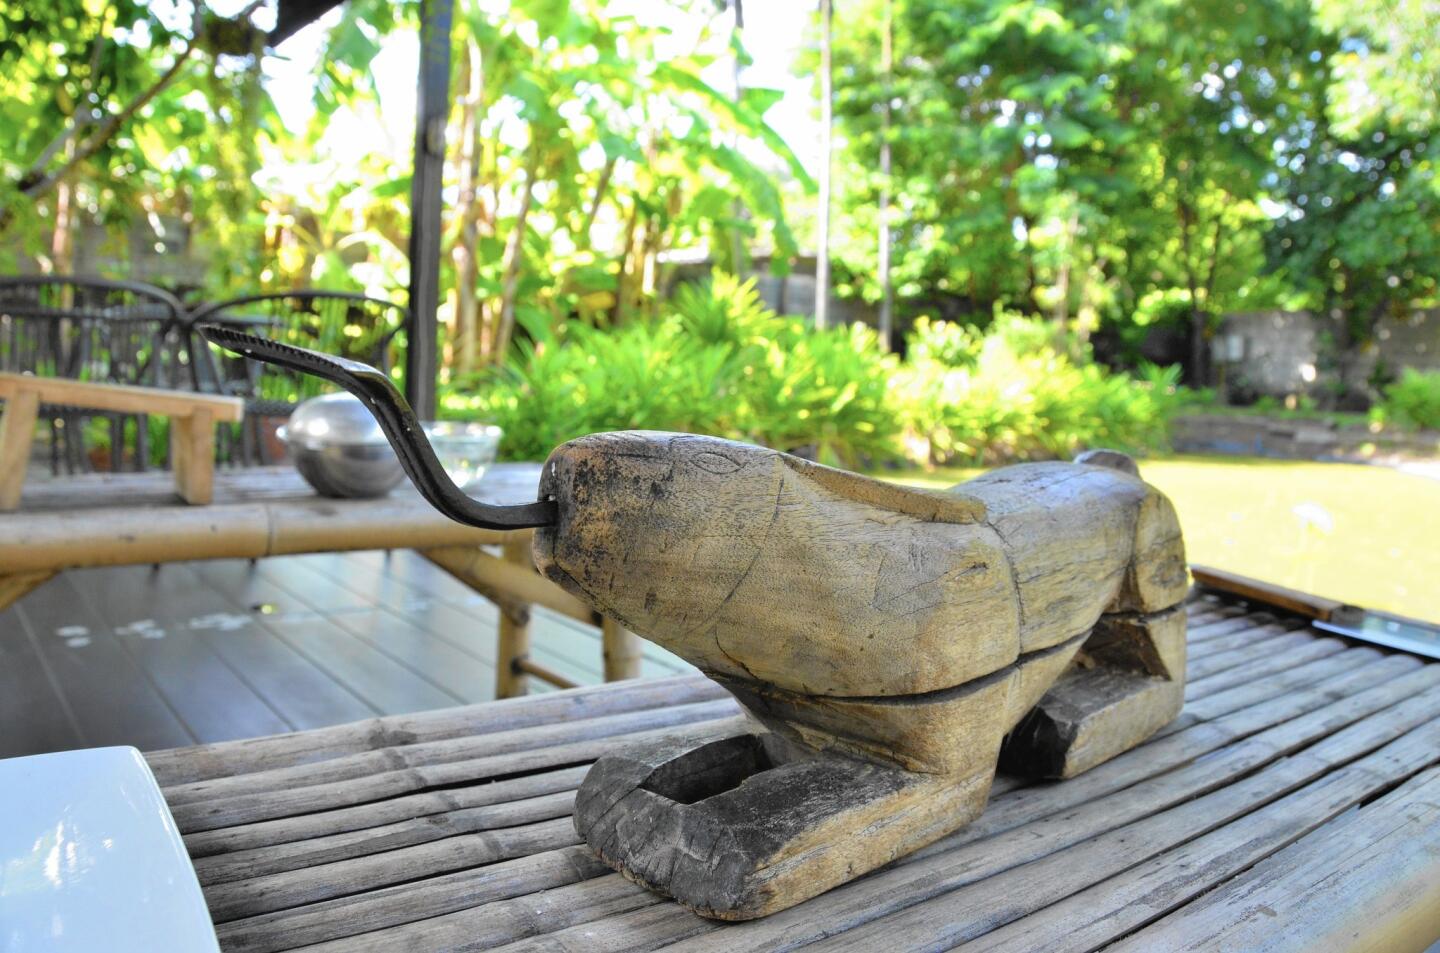 This large wooden rabbit is a tool used to dig the flesh out of coconuts.